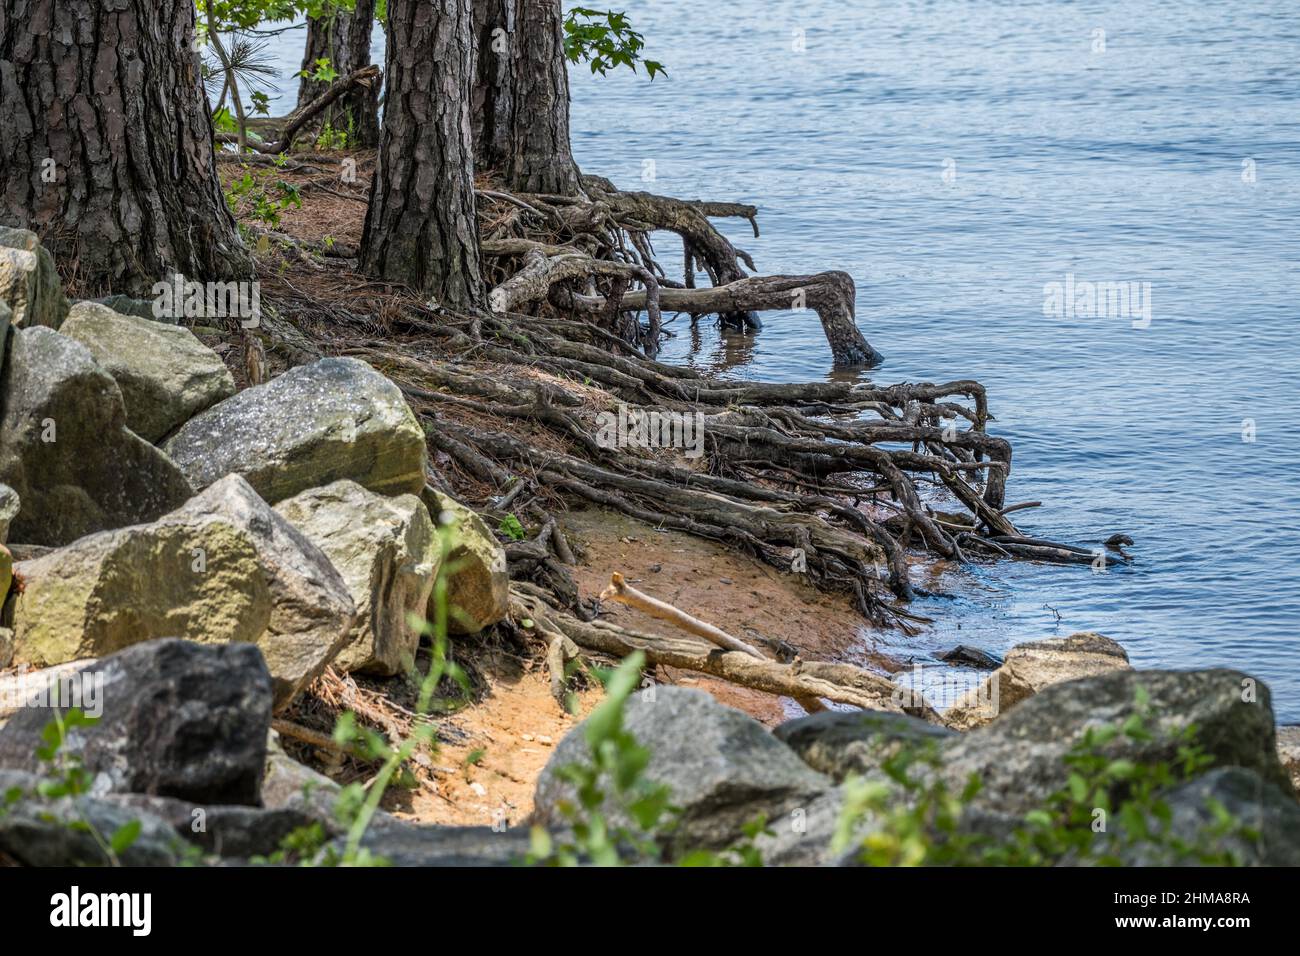 Exposed tree roots along the shore at the lake sticking out above the water surrounded by boulders to prevent erosion closeup view in springtime Stock Photo